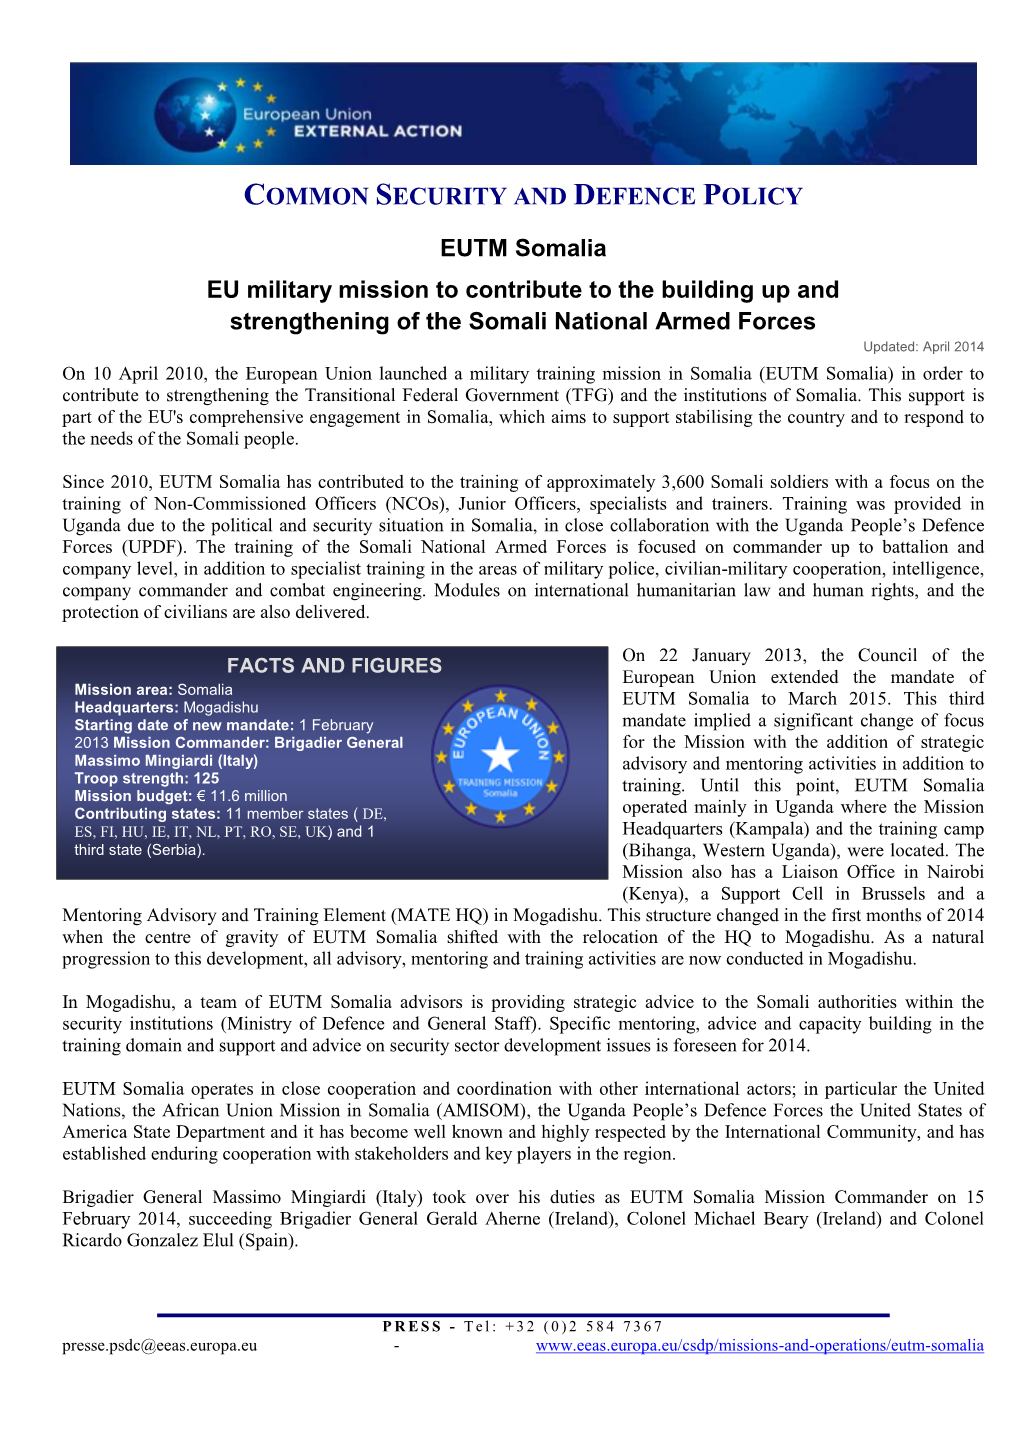 EUTM Somalia EU Military Mission to Contribute to the Building up and Strengthening of the Somali National Armed Forces